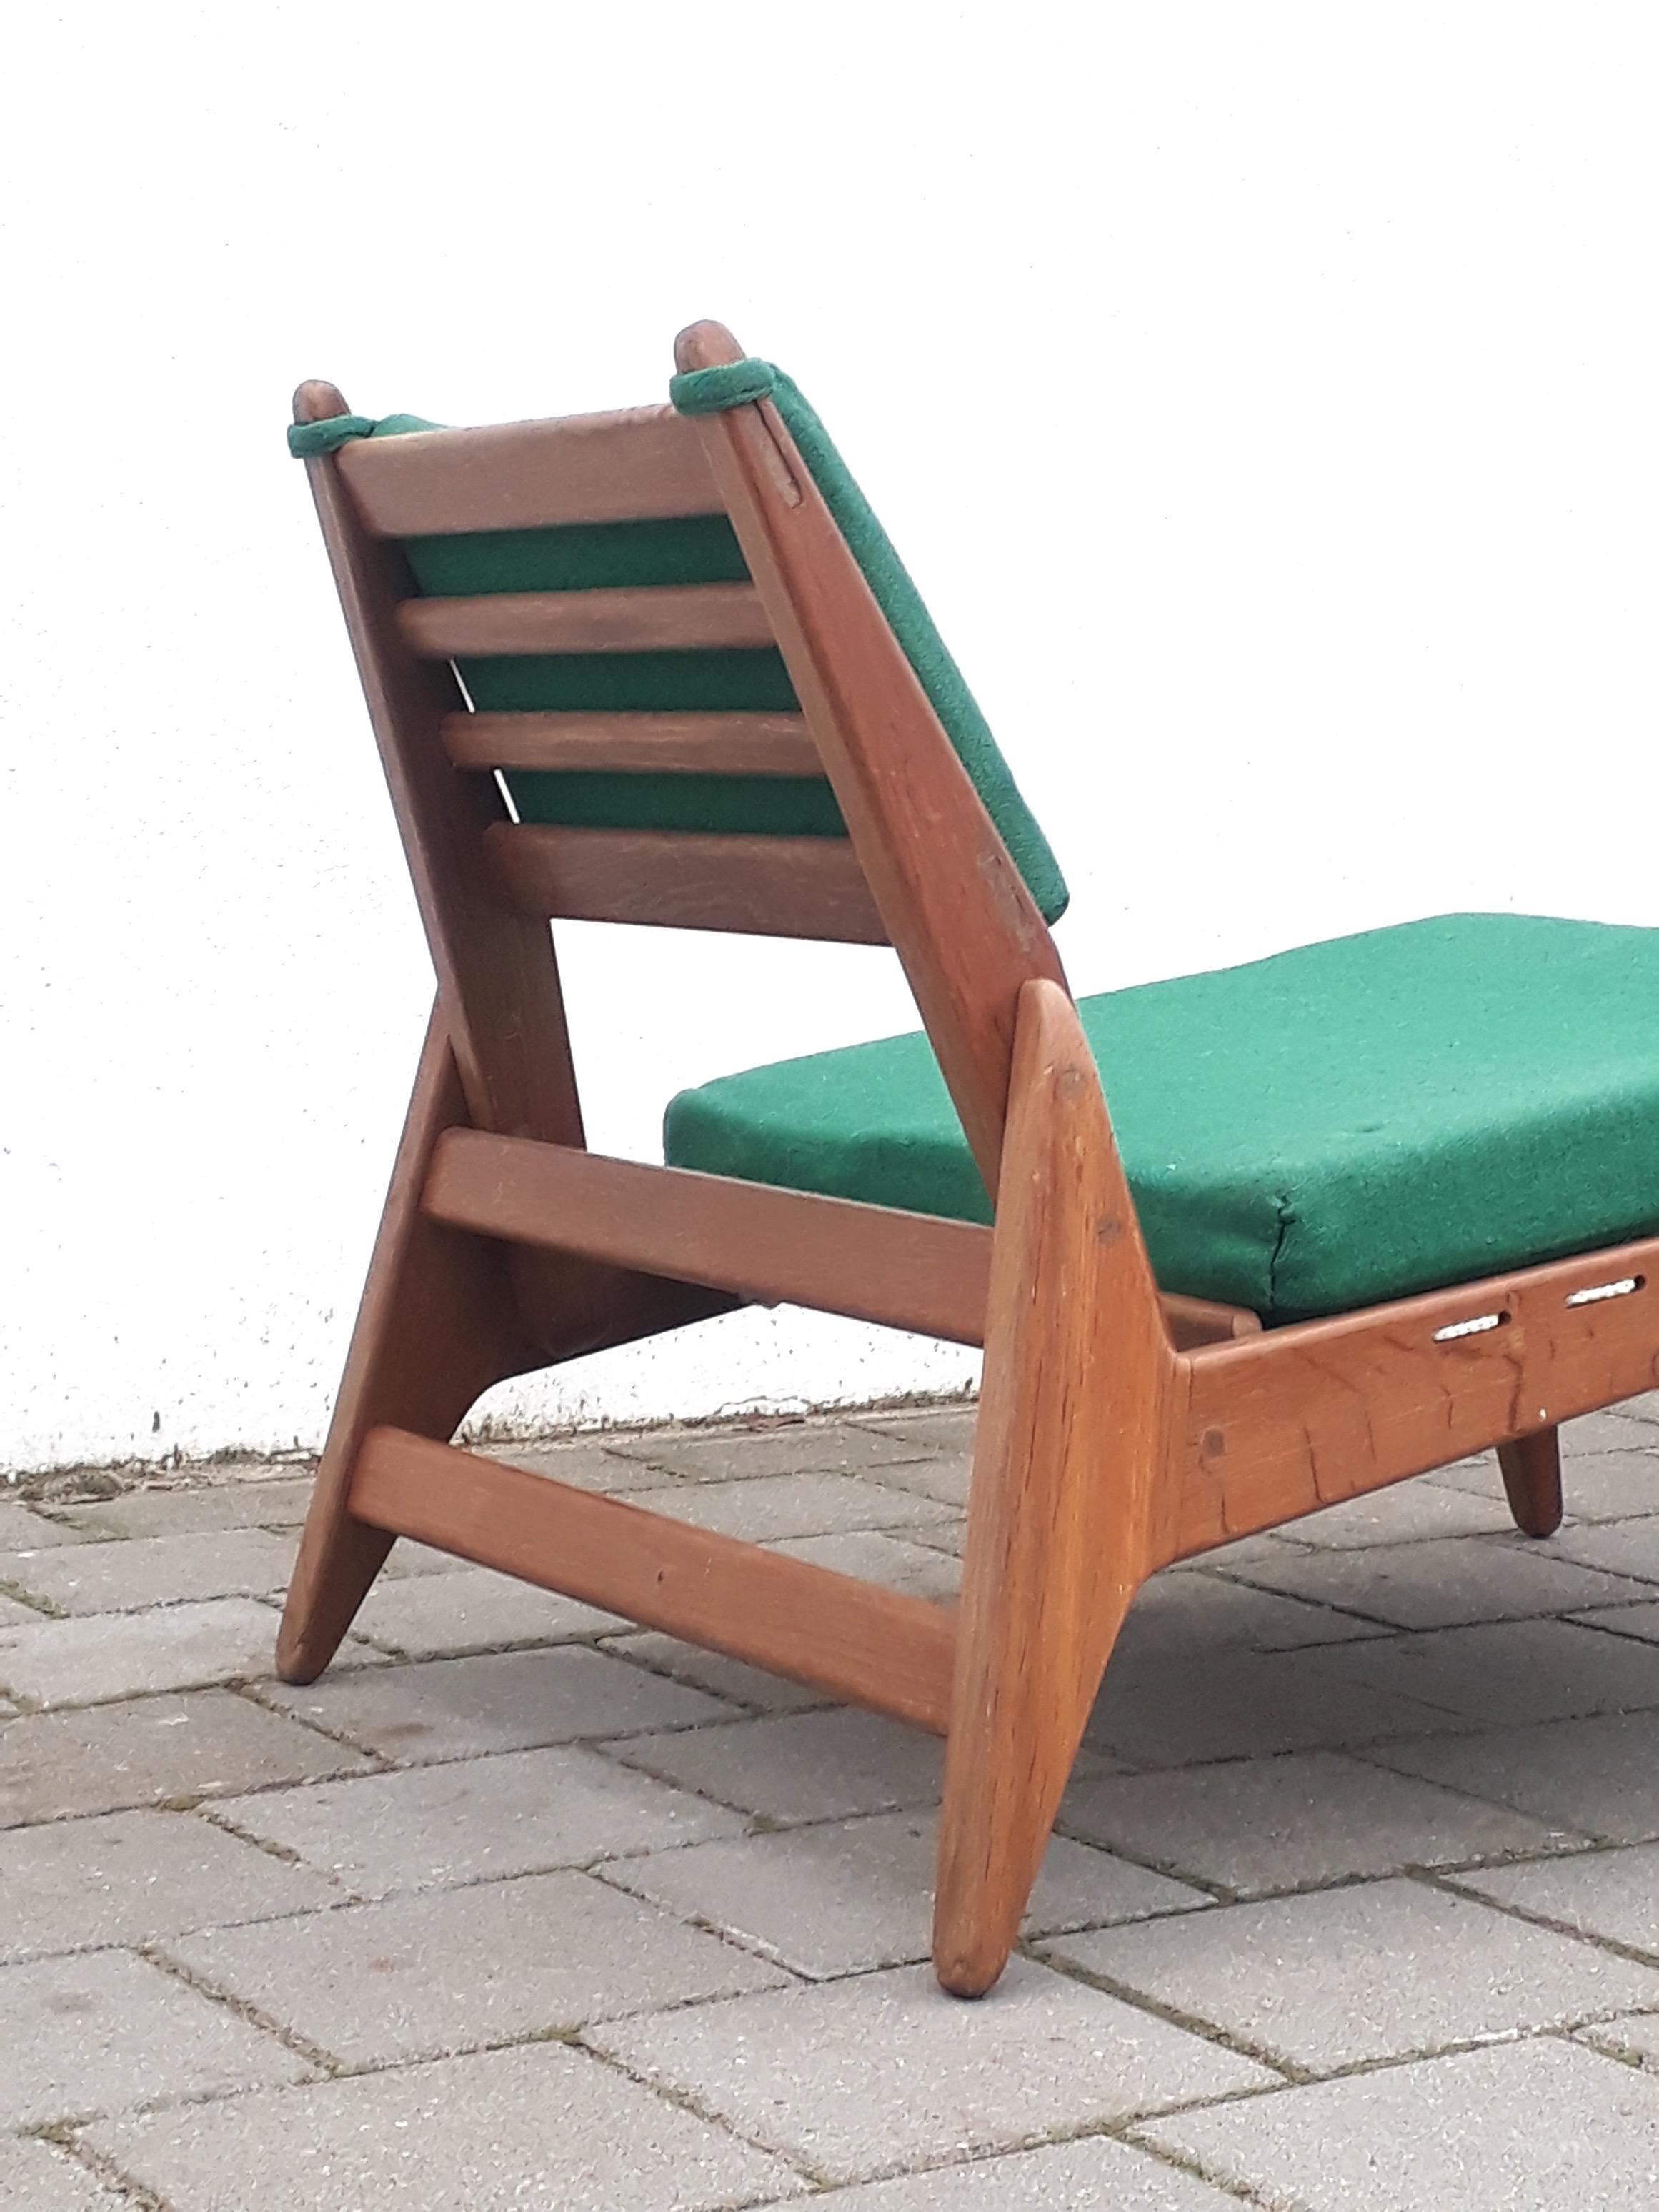 2 German Hunting Chairs Organic Teak Wood Attributed to Otto Frei, 1950s For Sale 1